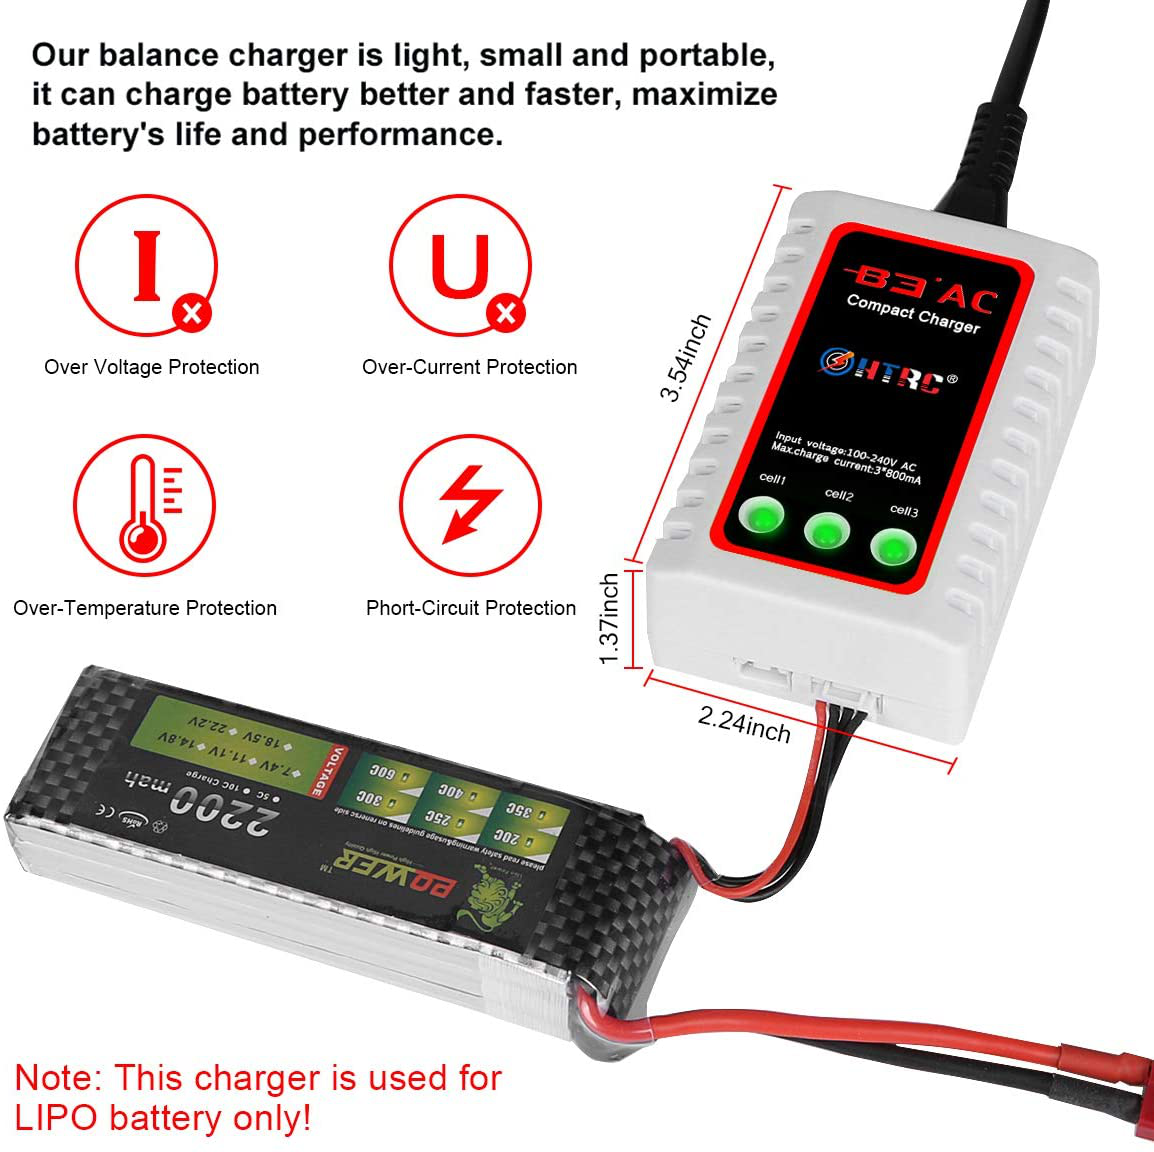 HTRC LiPo Charger 2S-3S Balance Battery Charger 7.4-11.1V RC B3AC Pro Compact Charger(White)